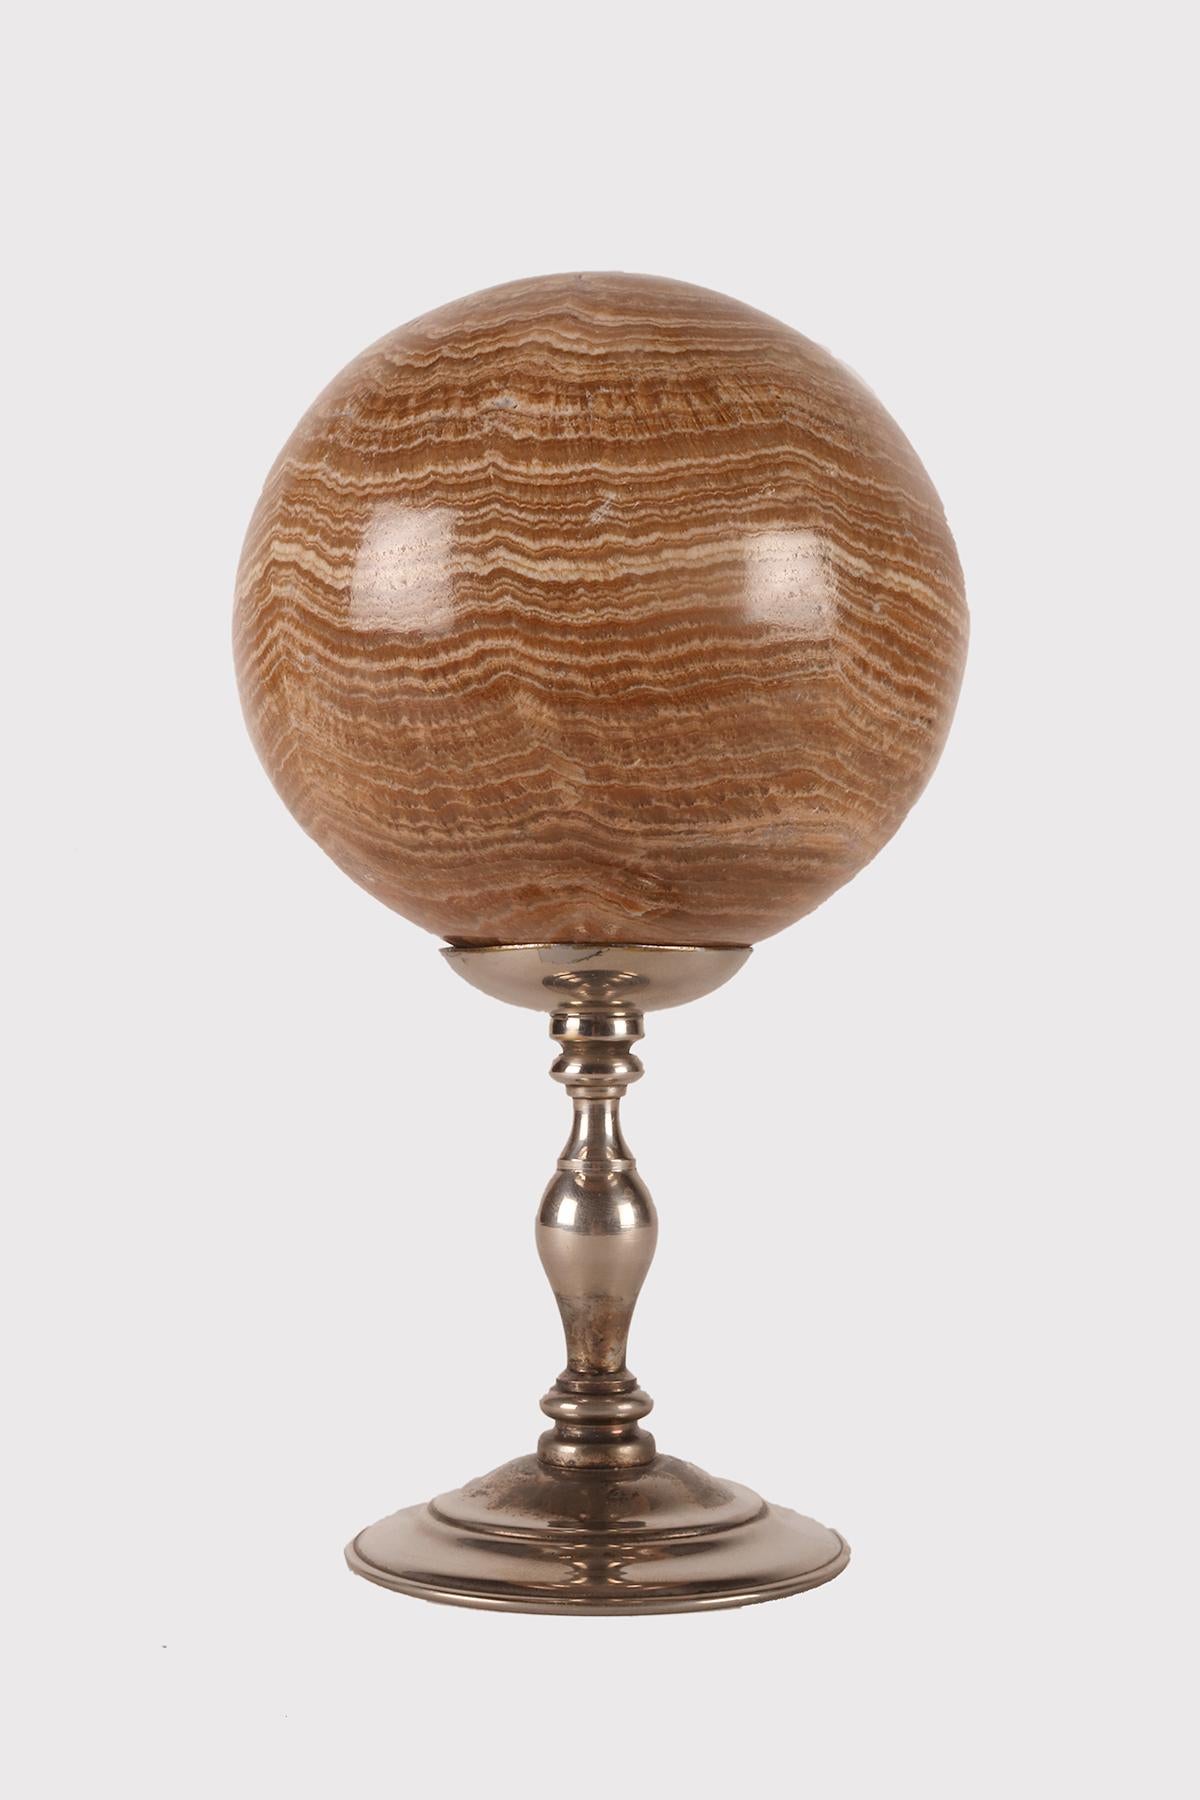 A sphere of Aragonite stone, resting on a base, made of silver which has a cup-shaped stand with a wavy profile that opens upwards with a concave surface. Italy circa 1870.